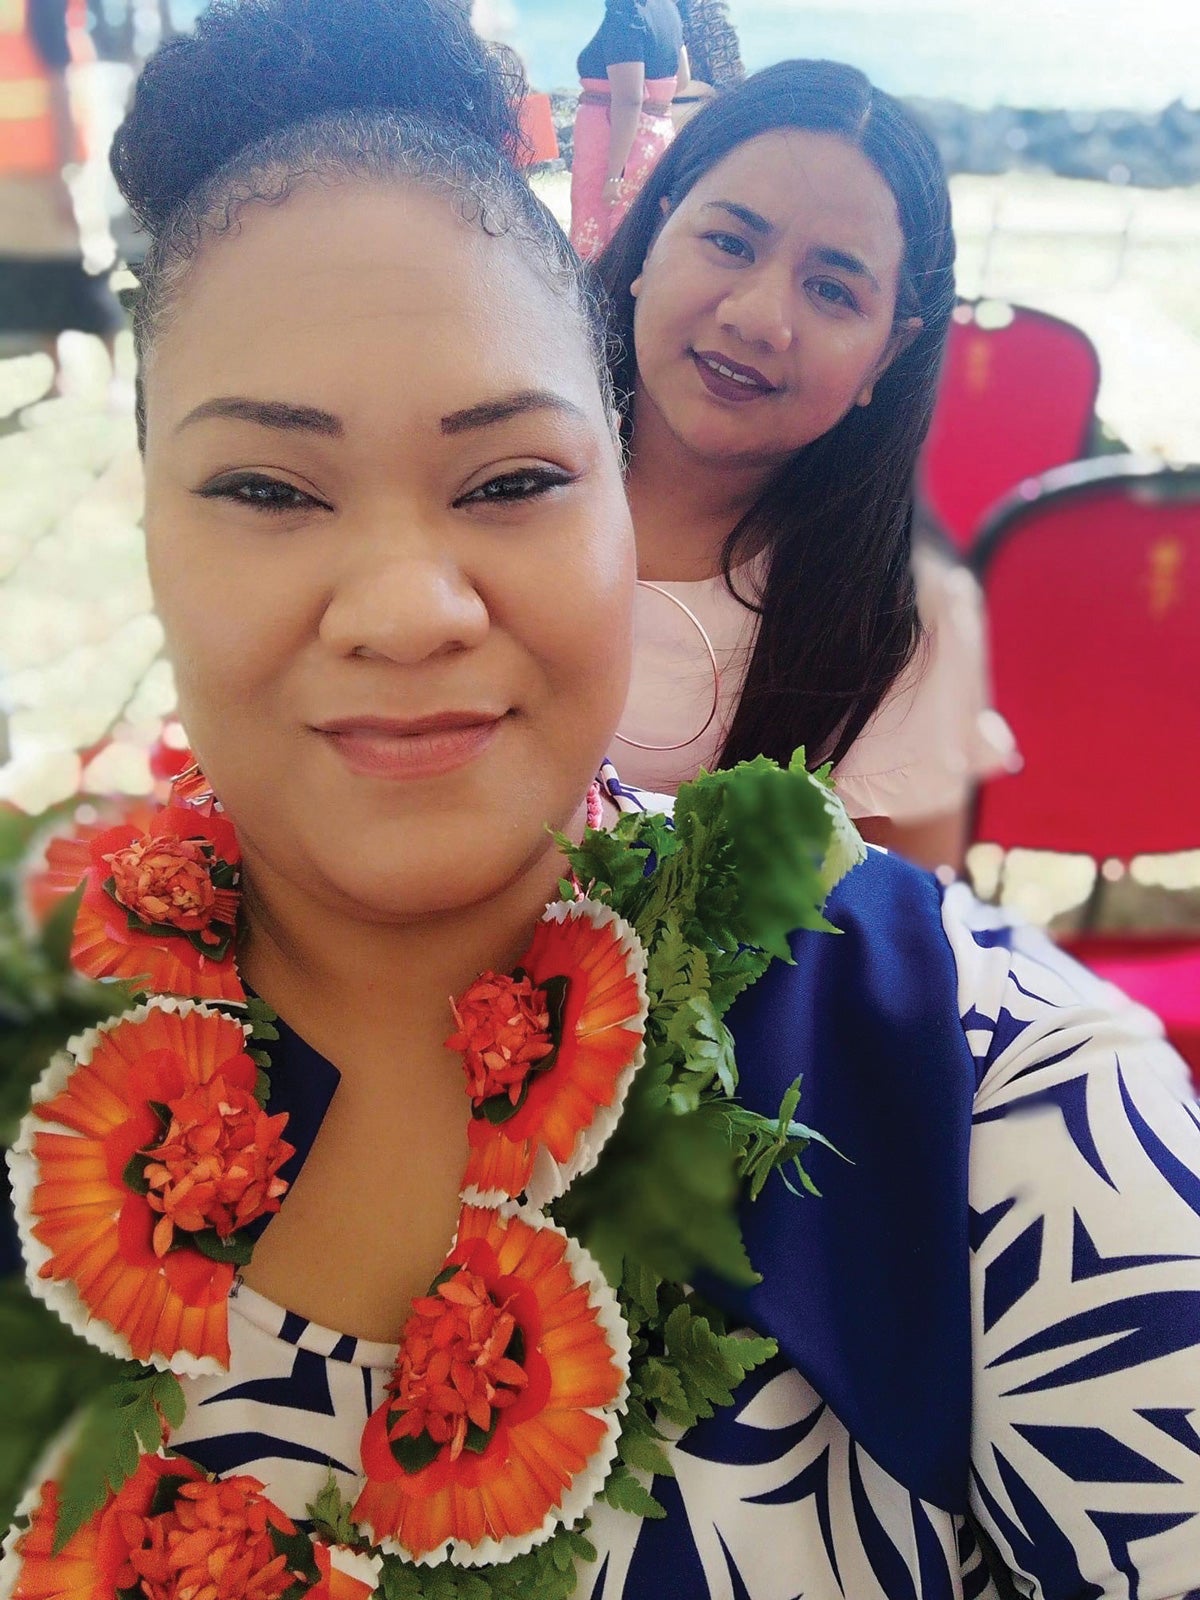 Lavinia Taumoepeau-Latu (G’22) is researching emergency and disaster preparedness in Tonga, the homeland of her parents.